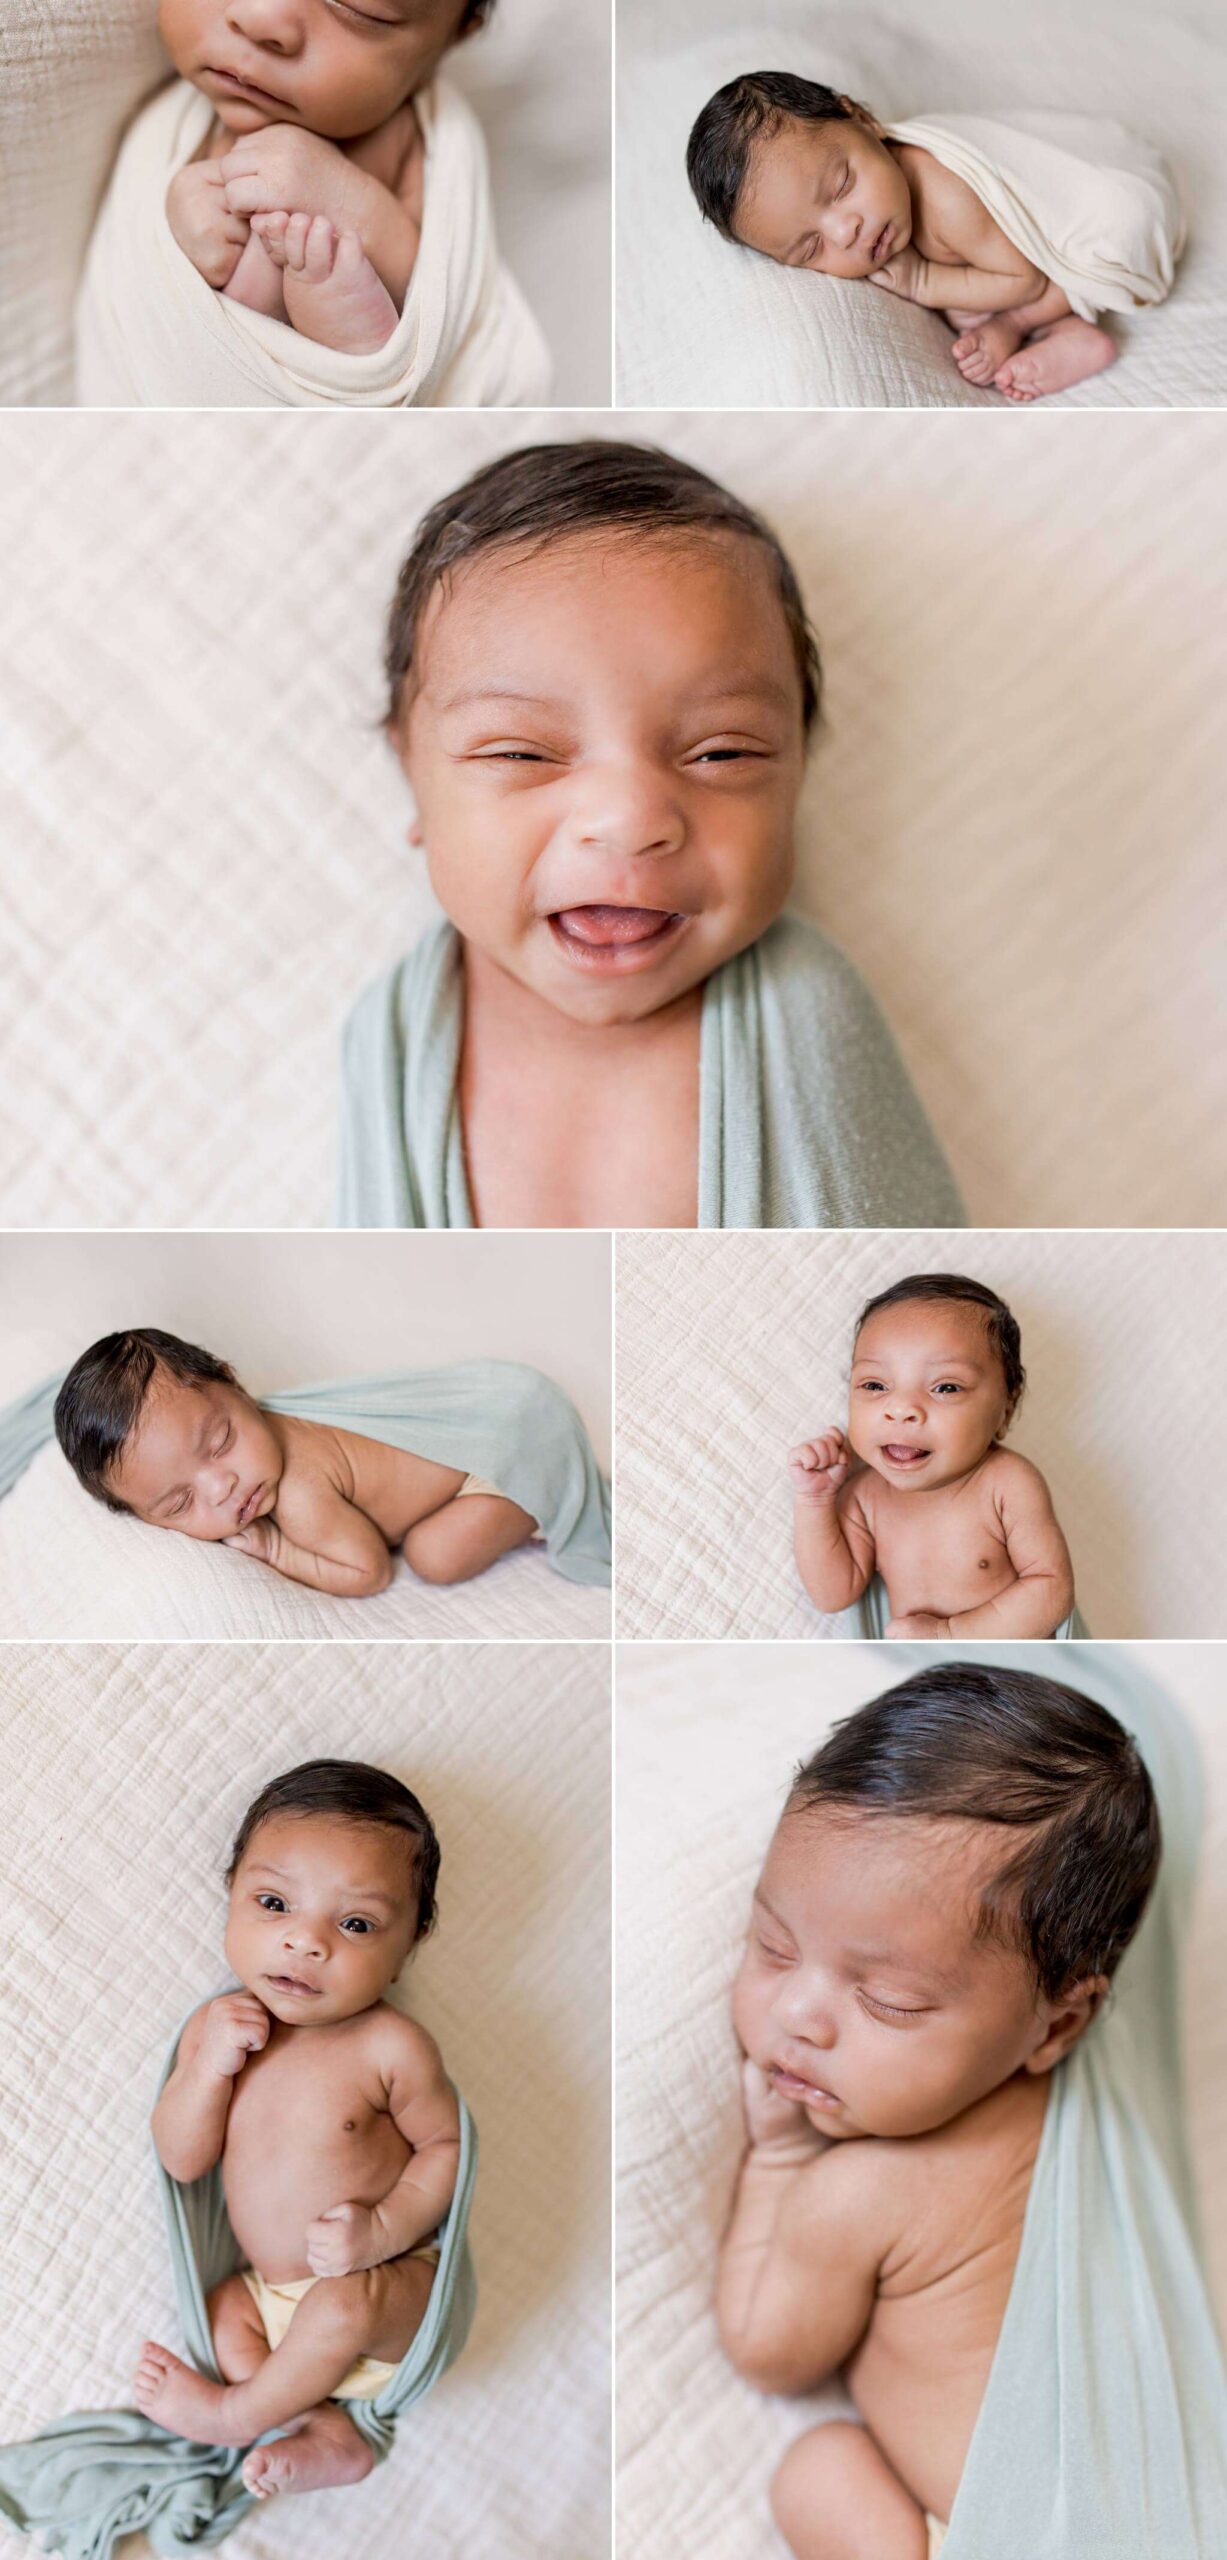 Afro American newborn boy on a cream blanket smiling at the camera and sleeping.